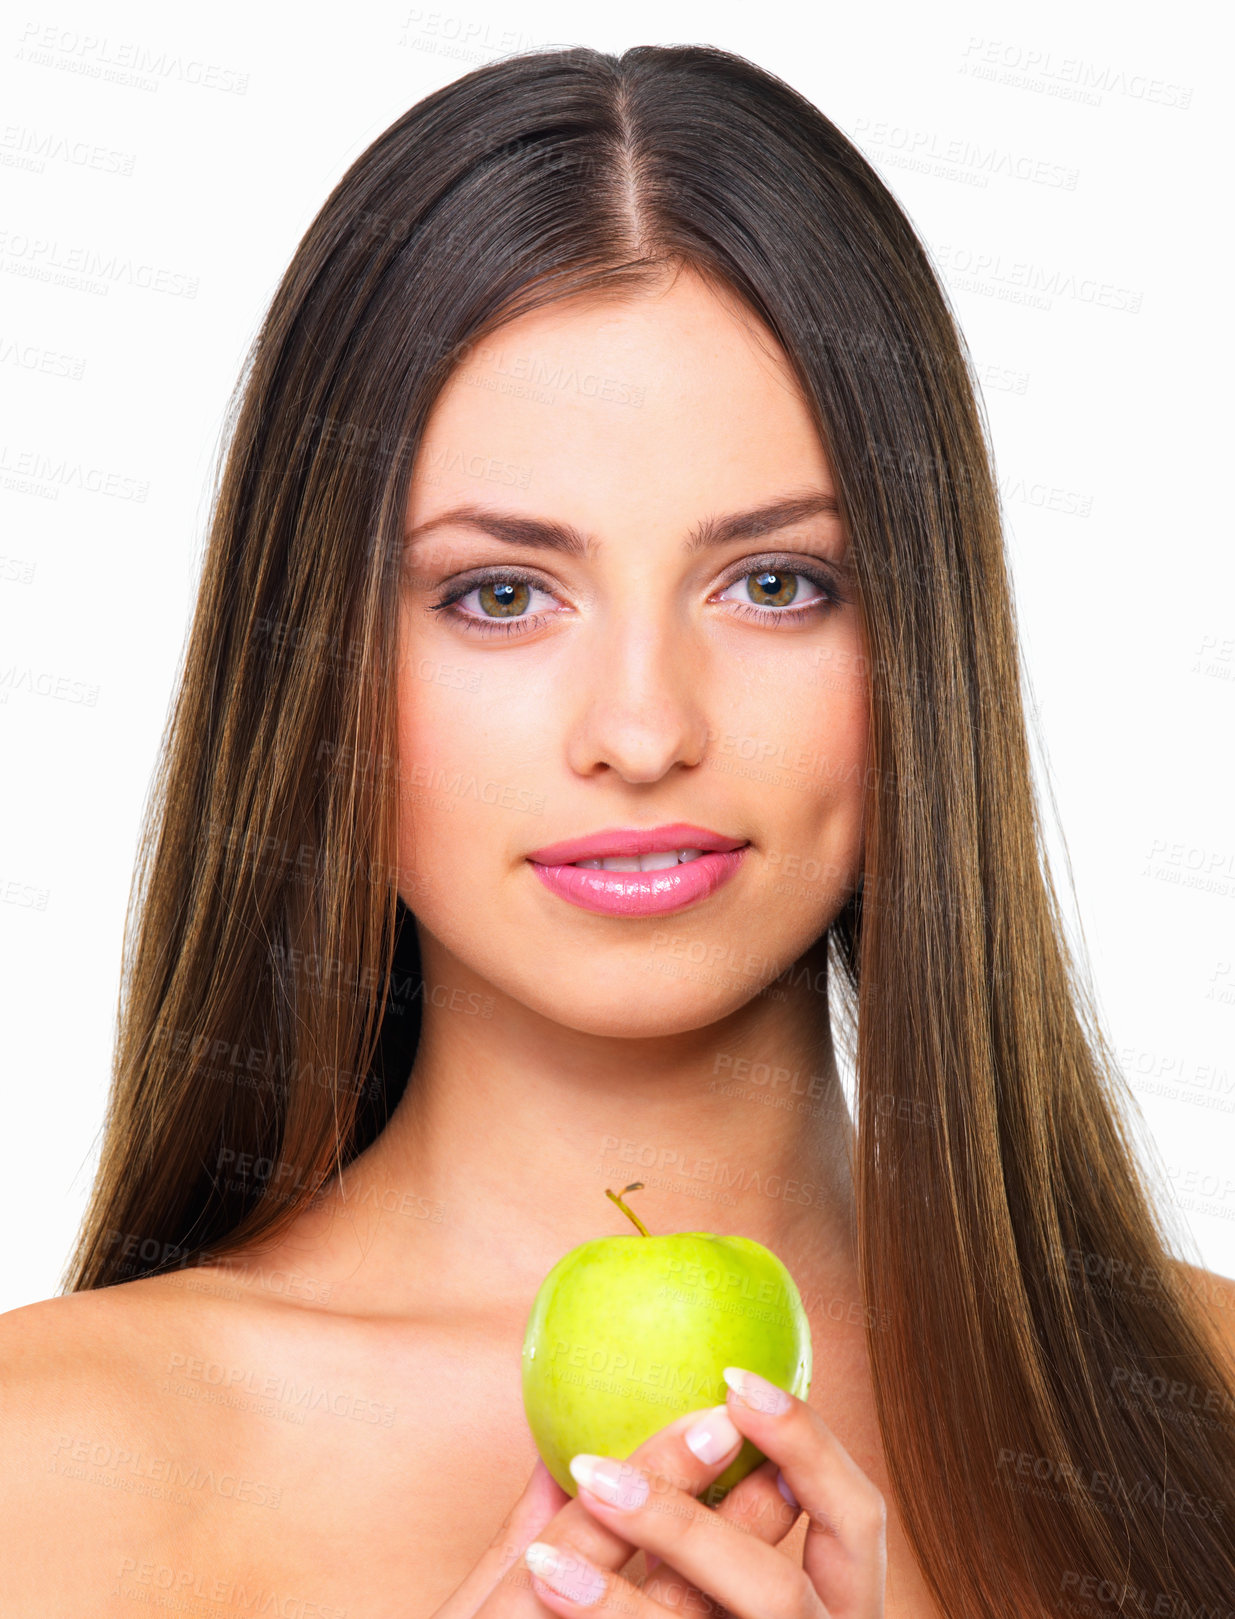 Buy stock photo Studio portrait of a beautiful young woman eating an apple against a white background